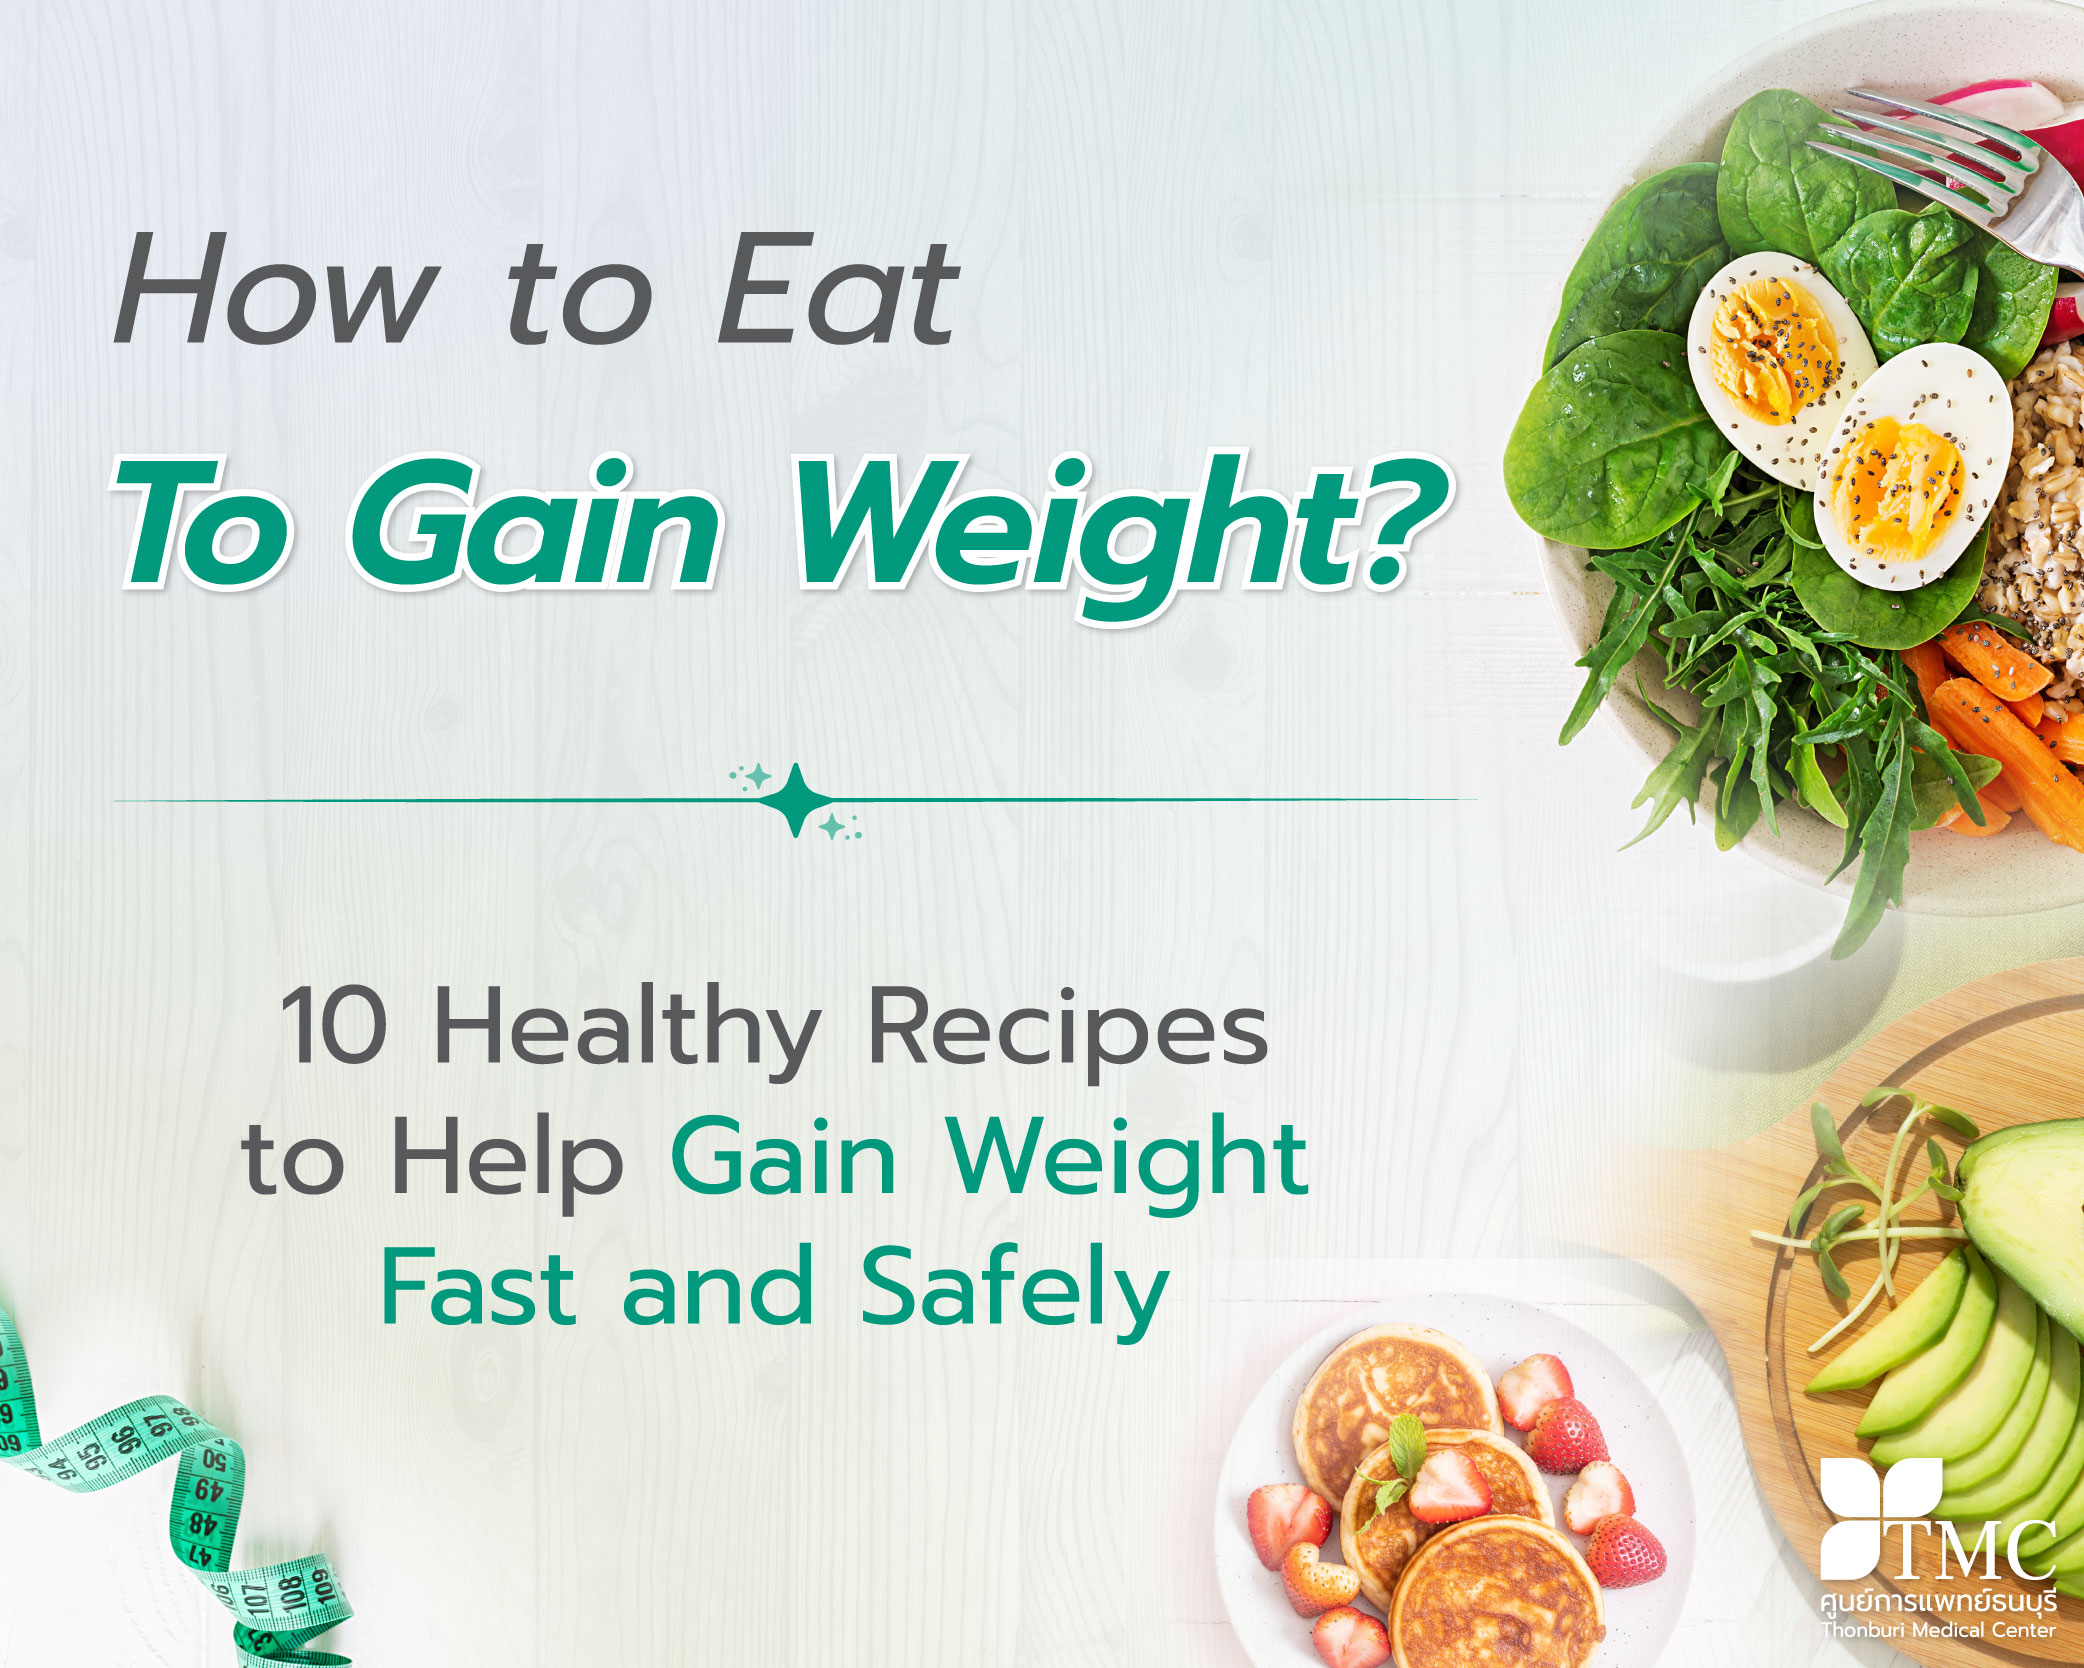 How to Eat To Gain Weight? 10 Healthy Recipes to Help Gain Weight Fast and Safely